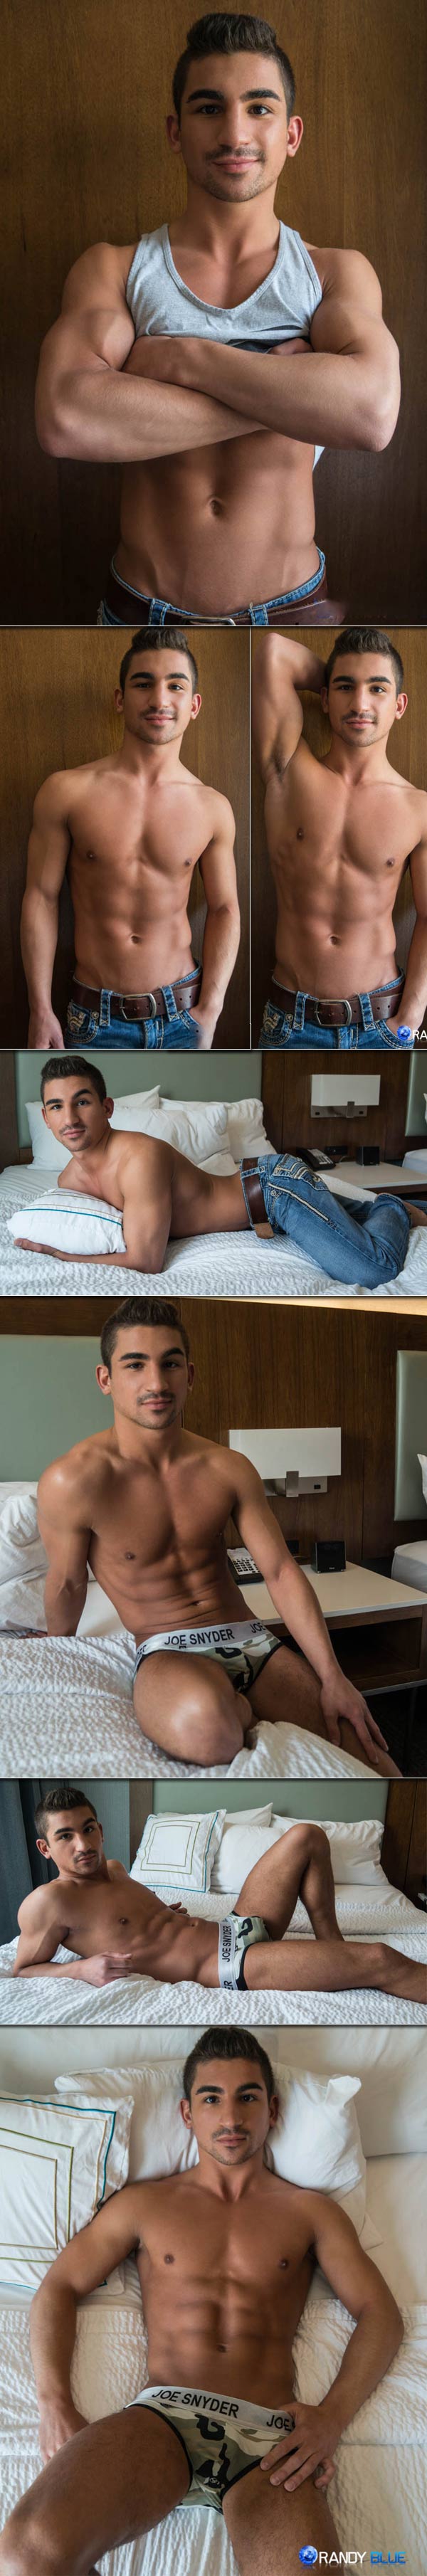 Lukas Valentine (Prepares For His First Bareback Scene) at Randy Blue